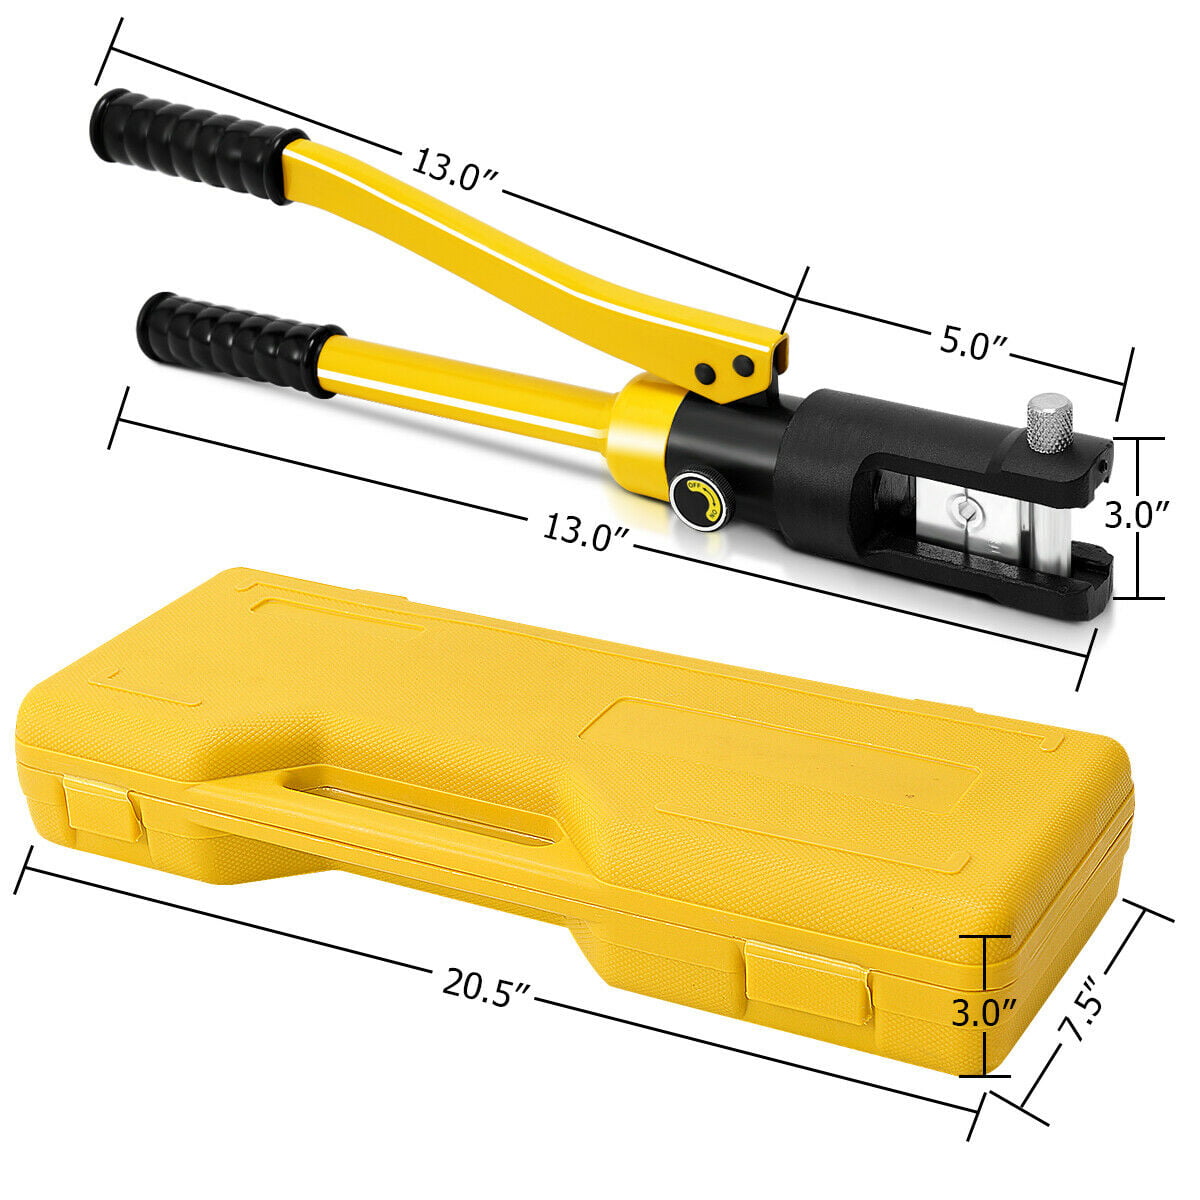 Yescom 16 Ton Hydraulic Wire Crimper Crimping Tool for sale online 